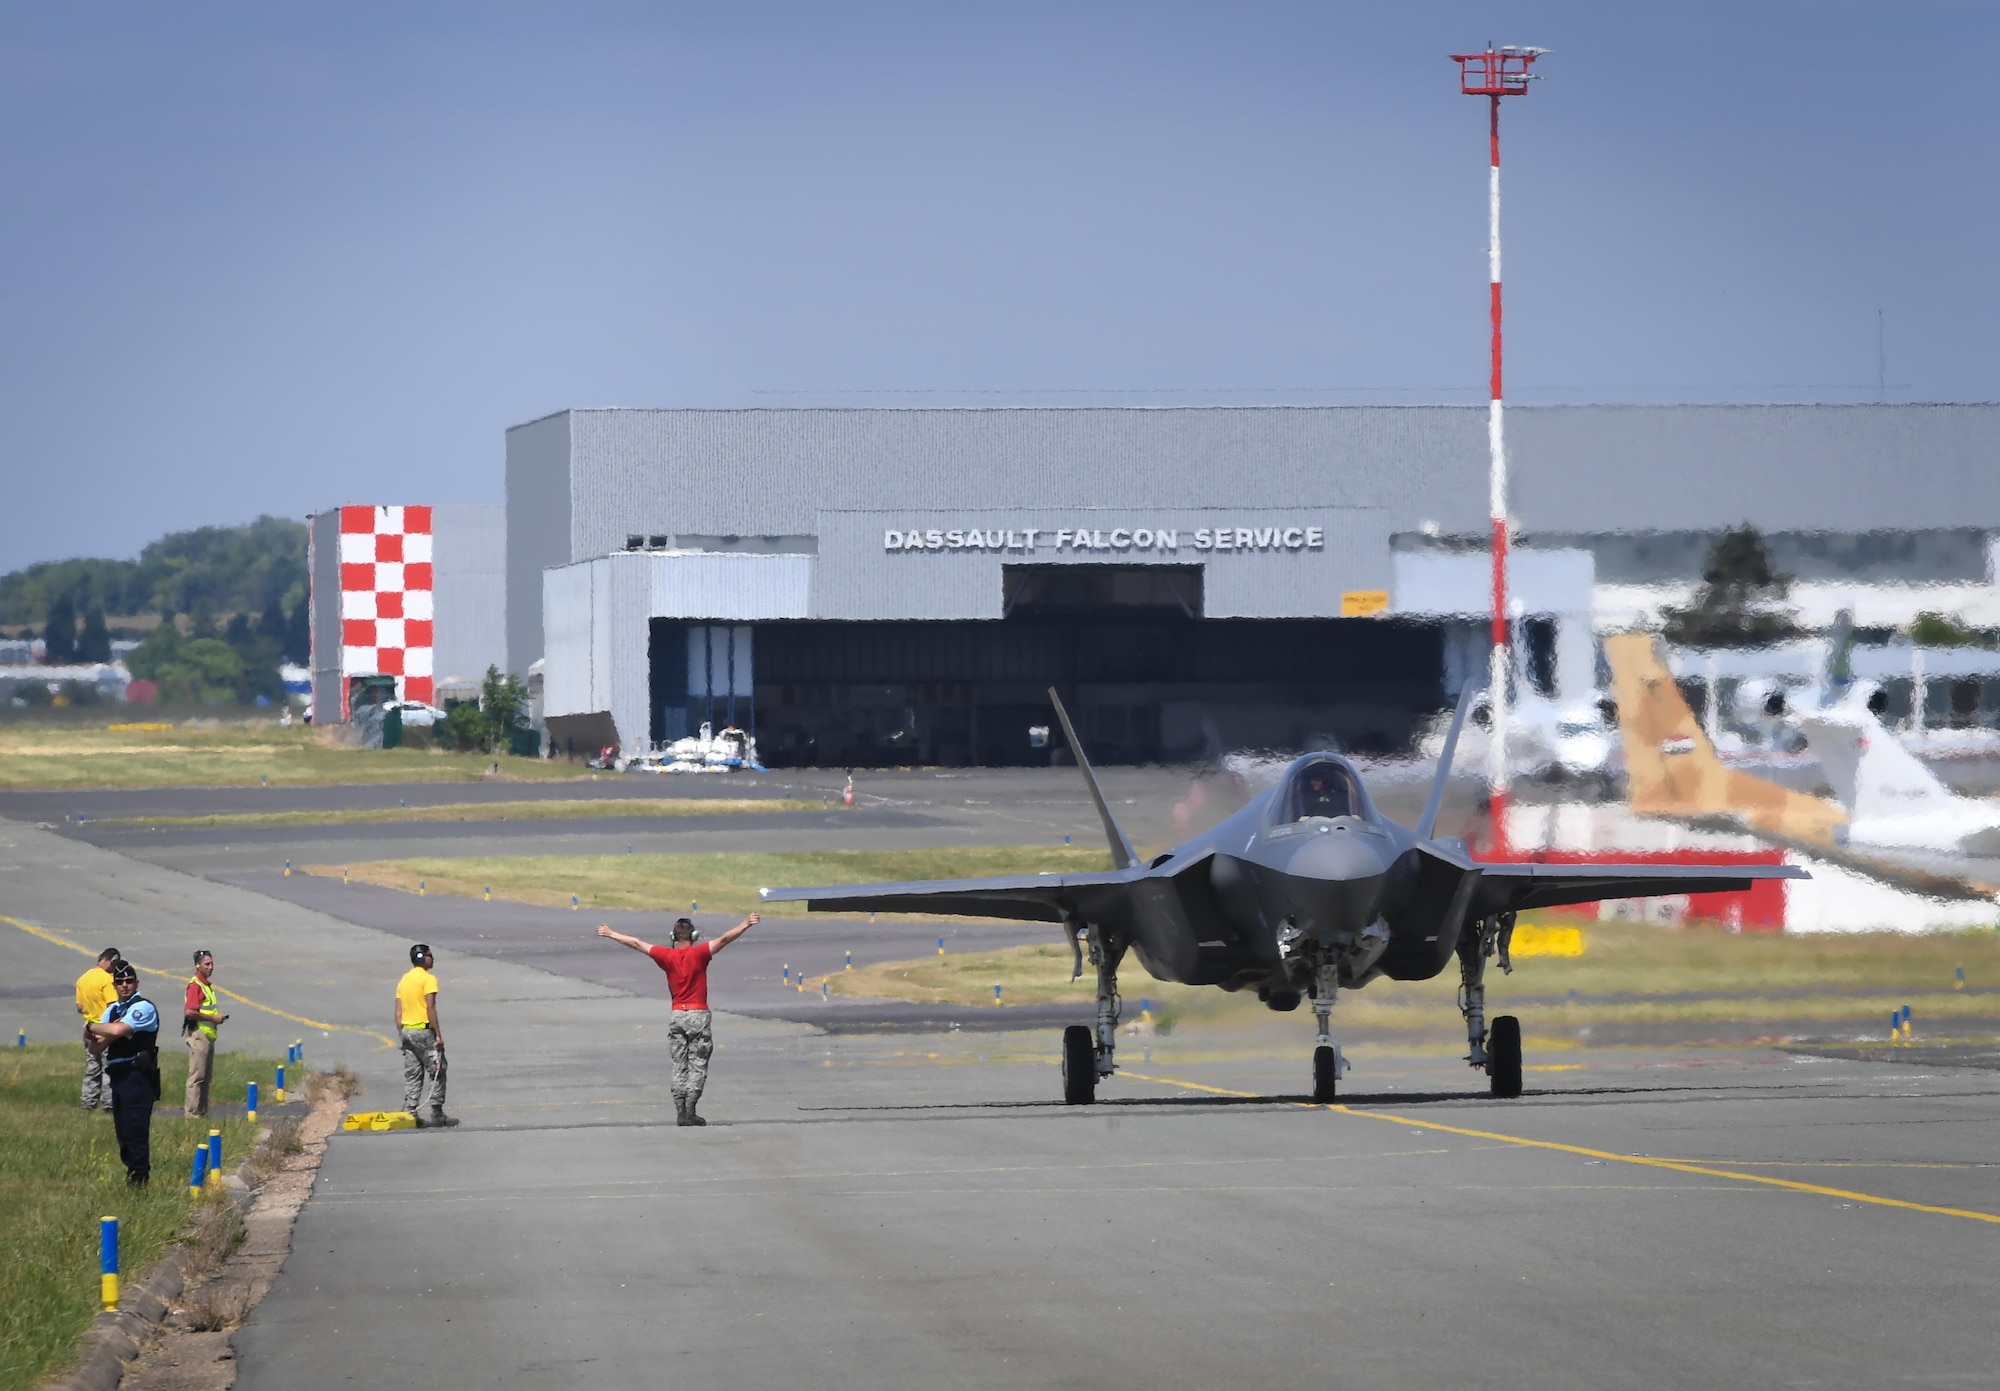 An F-35A Lightning II from Hill Air Force Base, Utah taxis back after performing for a crowd of nearly 100,000 people at Le Bourget Airport, France, during the Paris Air Show, June 23, 2017. The Paris Air Show offers the U.S. a unique opportunity to showcase their leadership in aerospace technology to an international audience. By participating, the U.S. hopes to promote standardization and interoperability of equipment with their NATO allies and international partners. This year marks the 52nd Paris Air Show and the event features more than 100 aircraft from around the world. (U.S. Air Force photo/ Tech. Sgt. Ryan Crane)